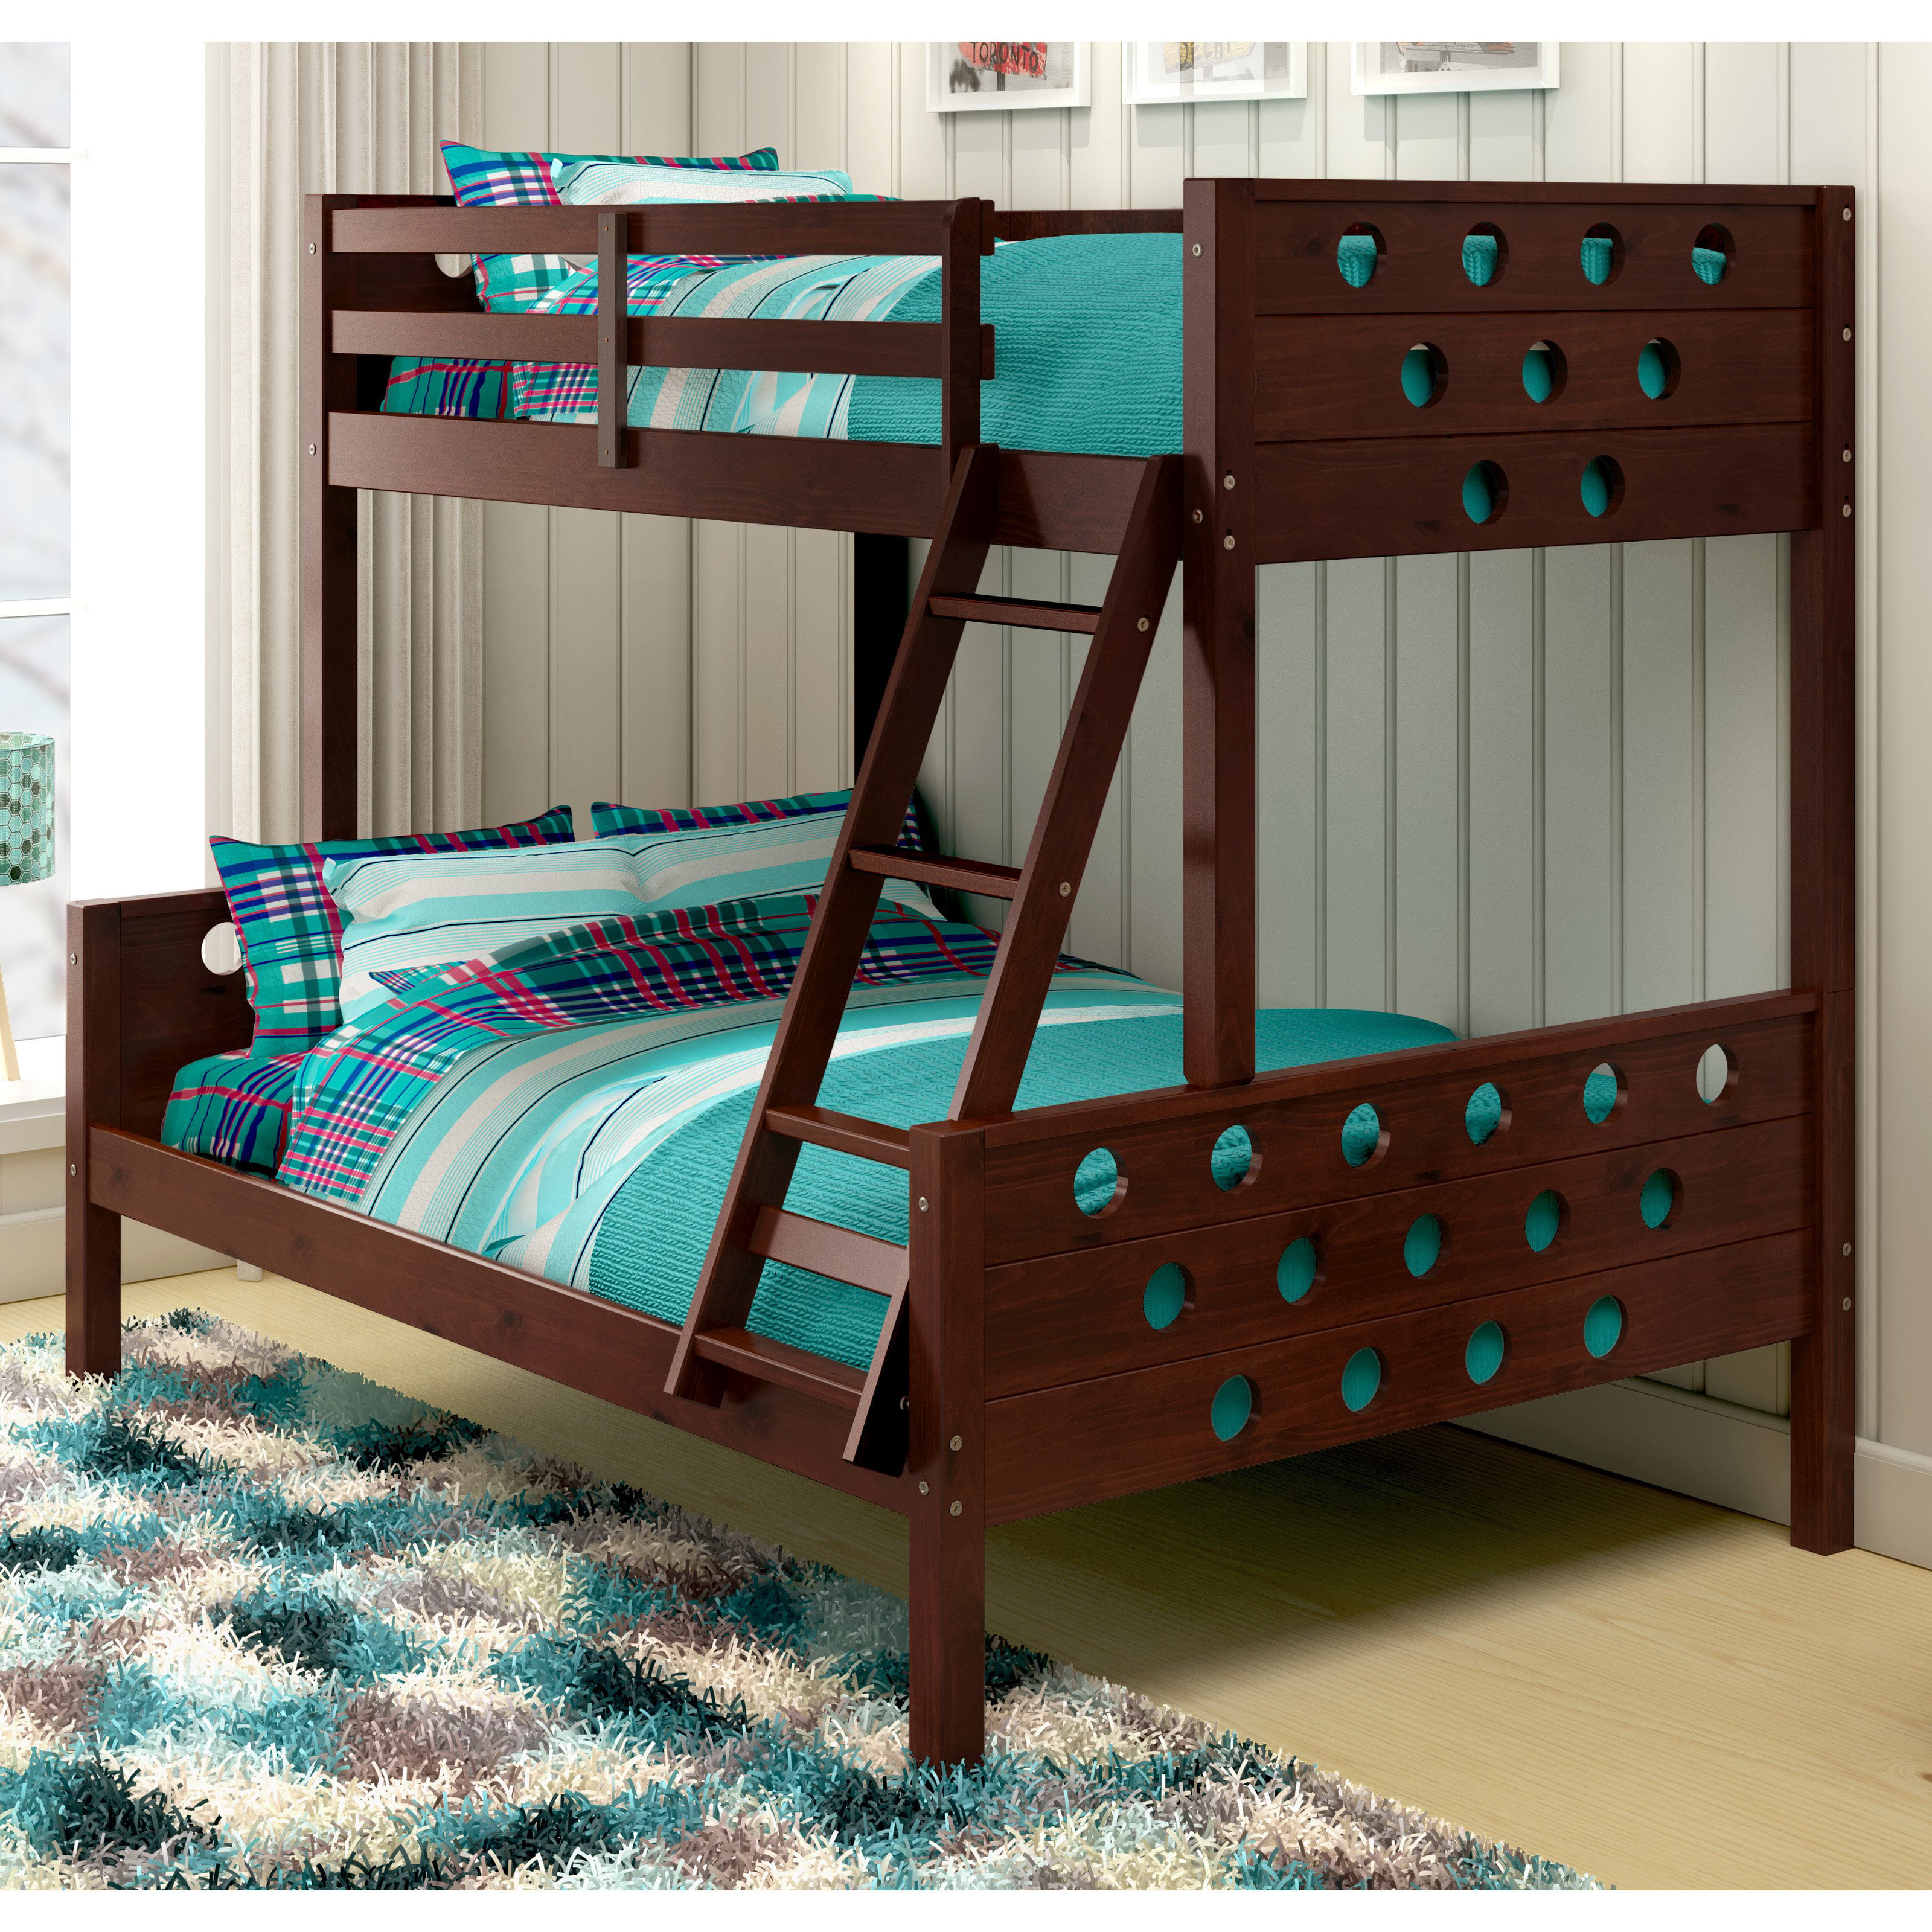 Donco Circles Twin Over Full Bunk Bed, Modern Bunk Beds Twin Over Full